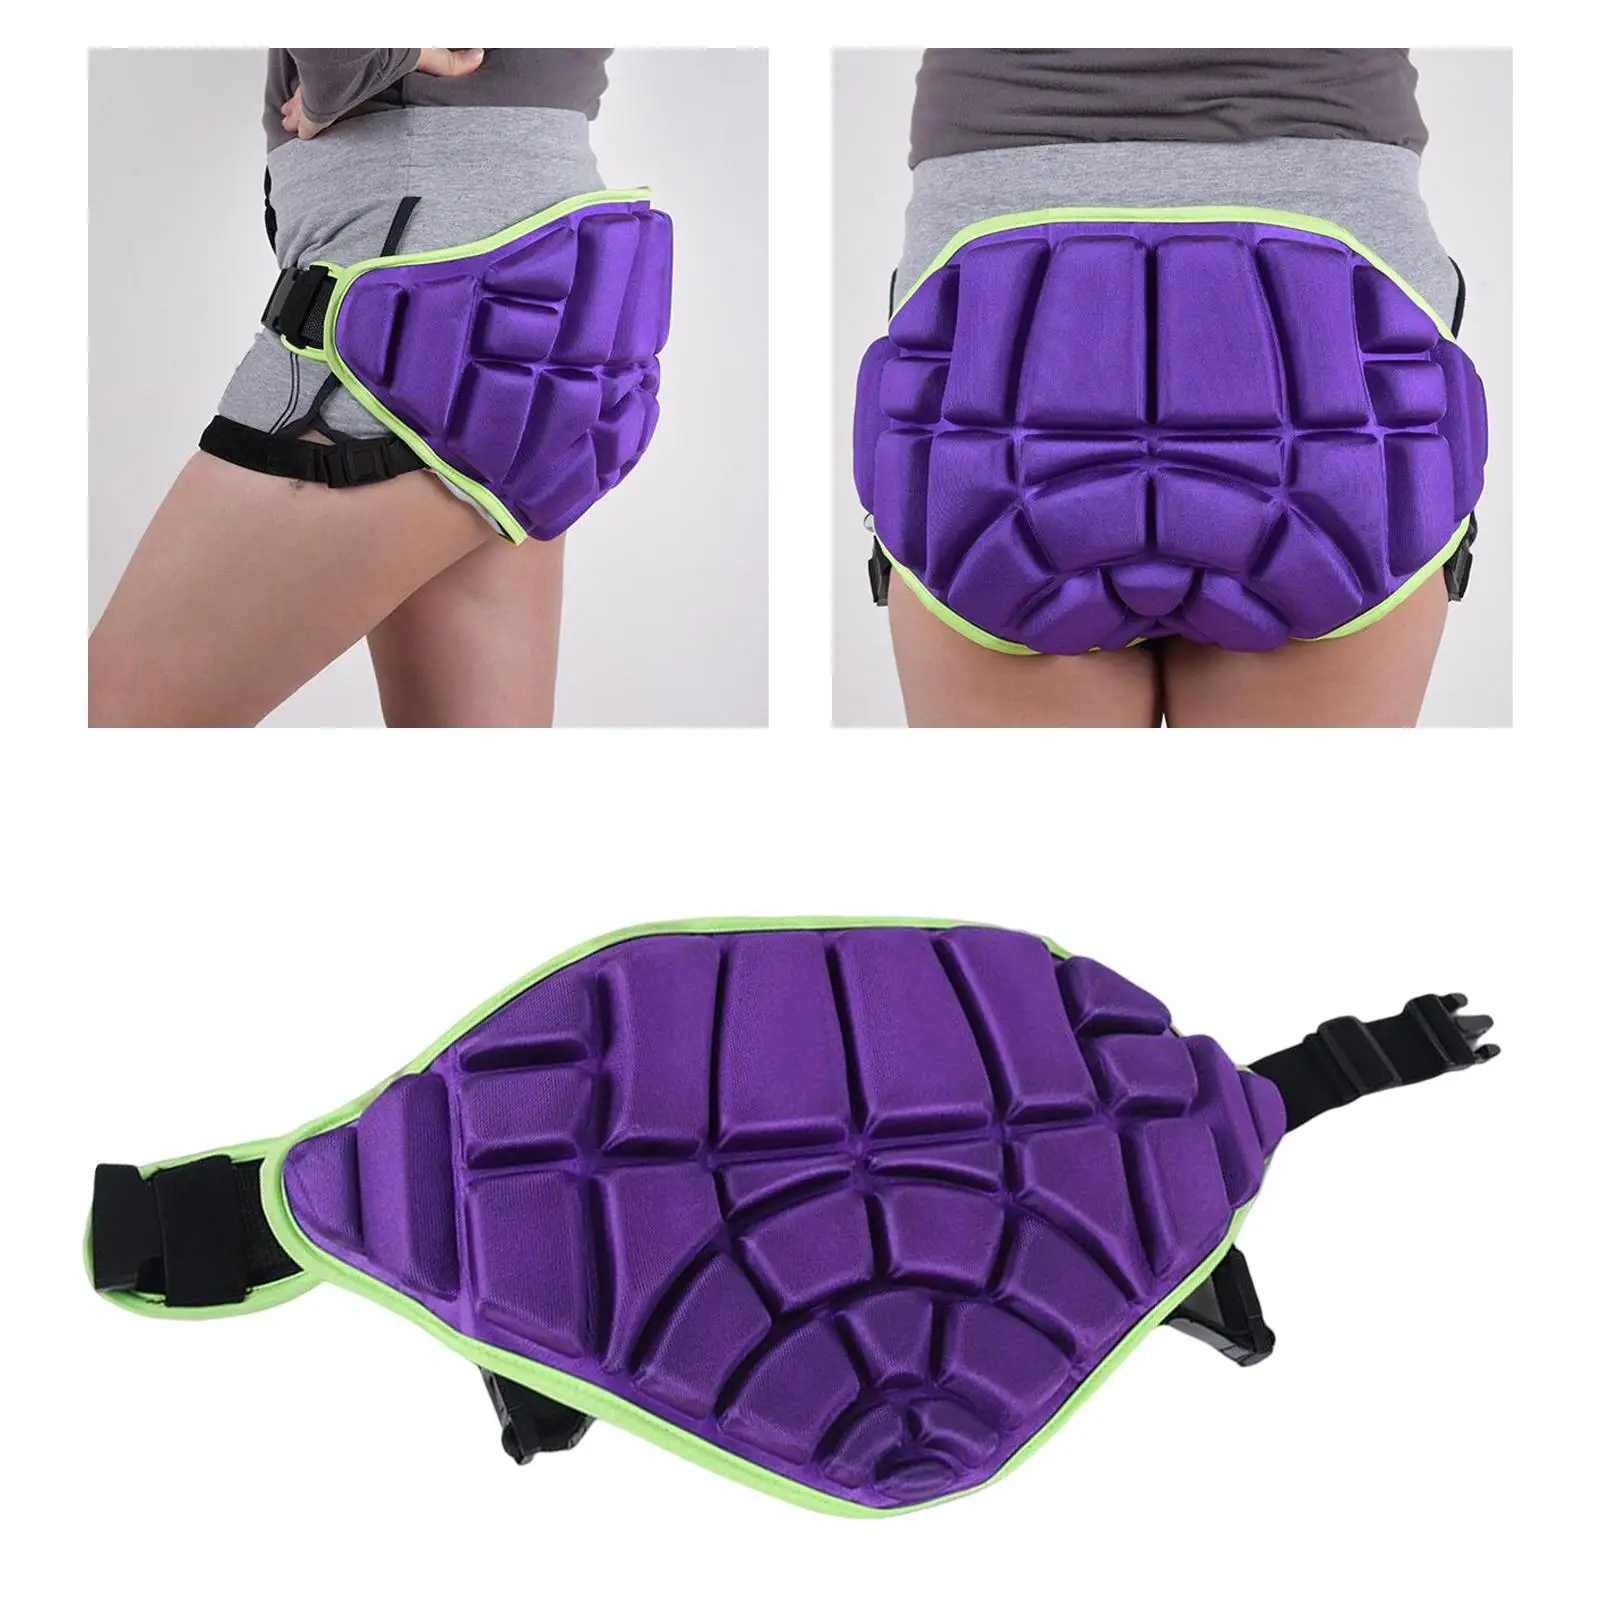 Protector Butt Padded Shorts Padded Skiing Snowboard Hip Buttocks Protective Pants Shorts Protector Gear Thick Kids Adult Hip